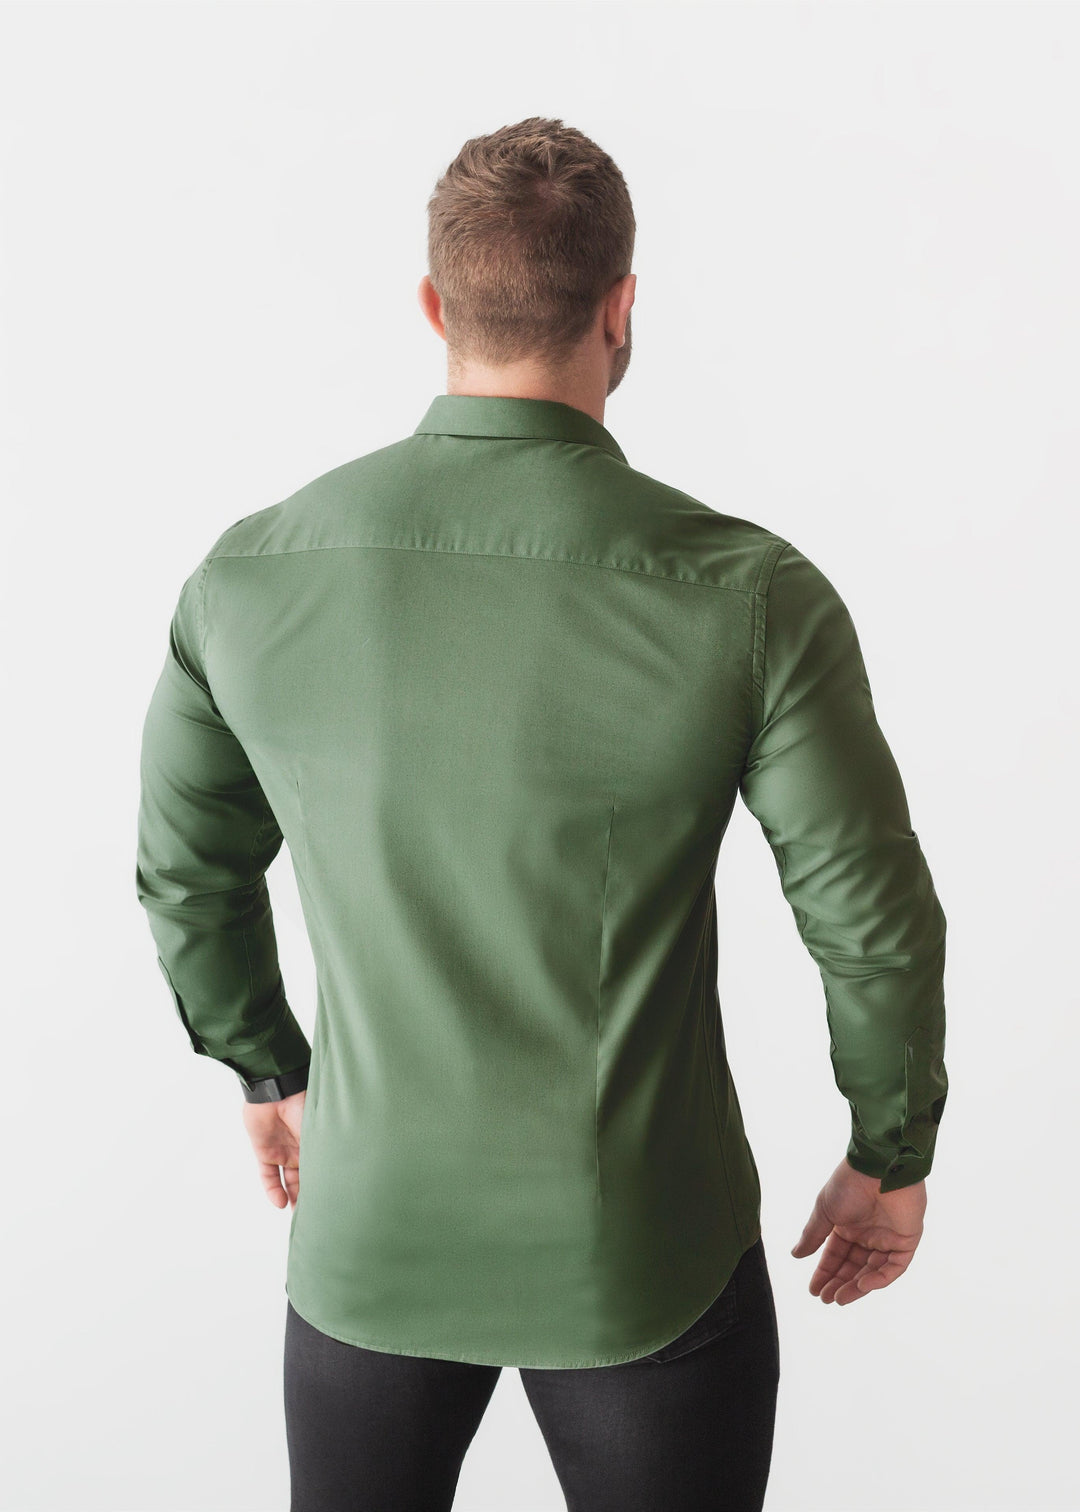 Olive Green Tapered Fit Shirt For Men Back. A Proportionally Fitted and Olive Muscle Fit Shirt. Ideal for bodybuilders.